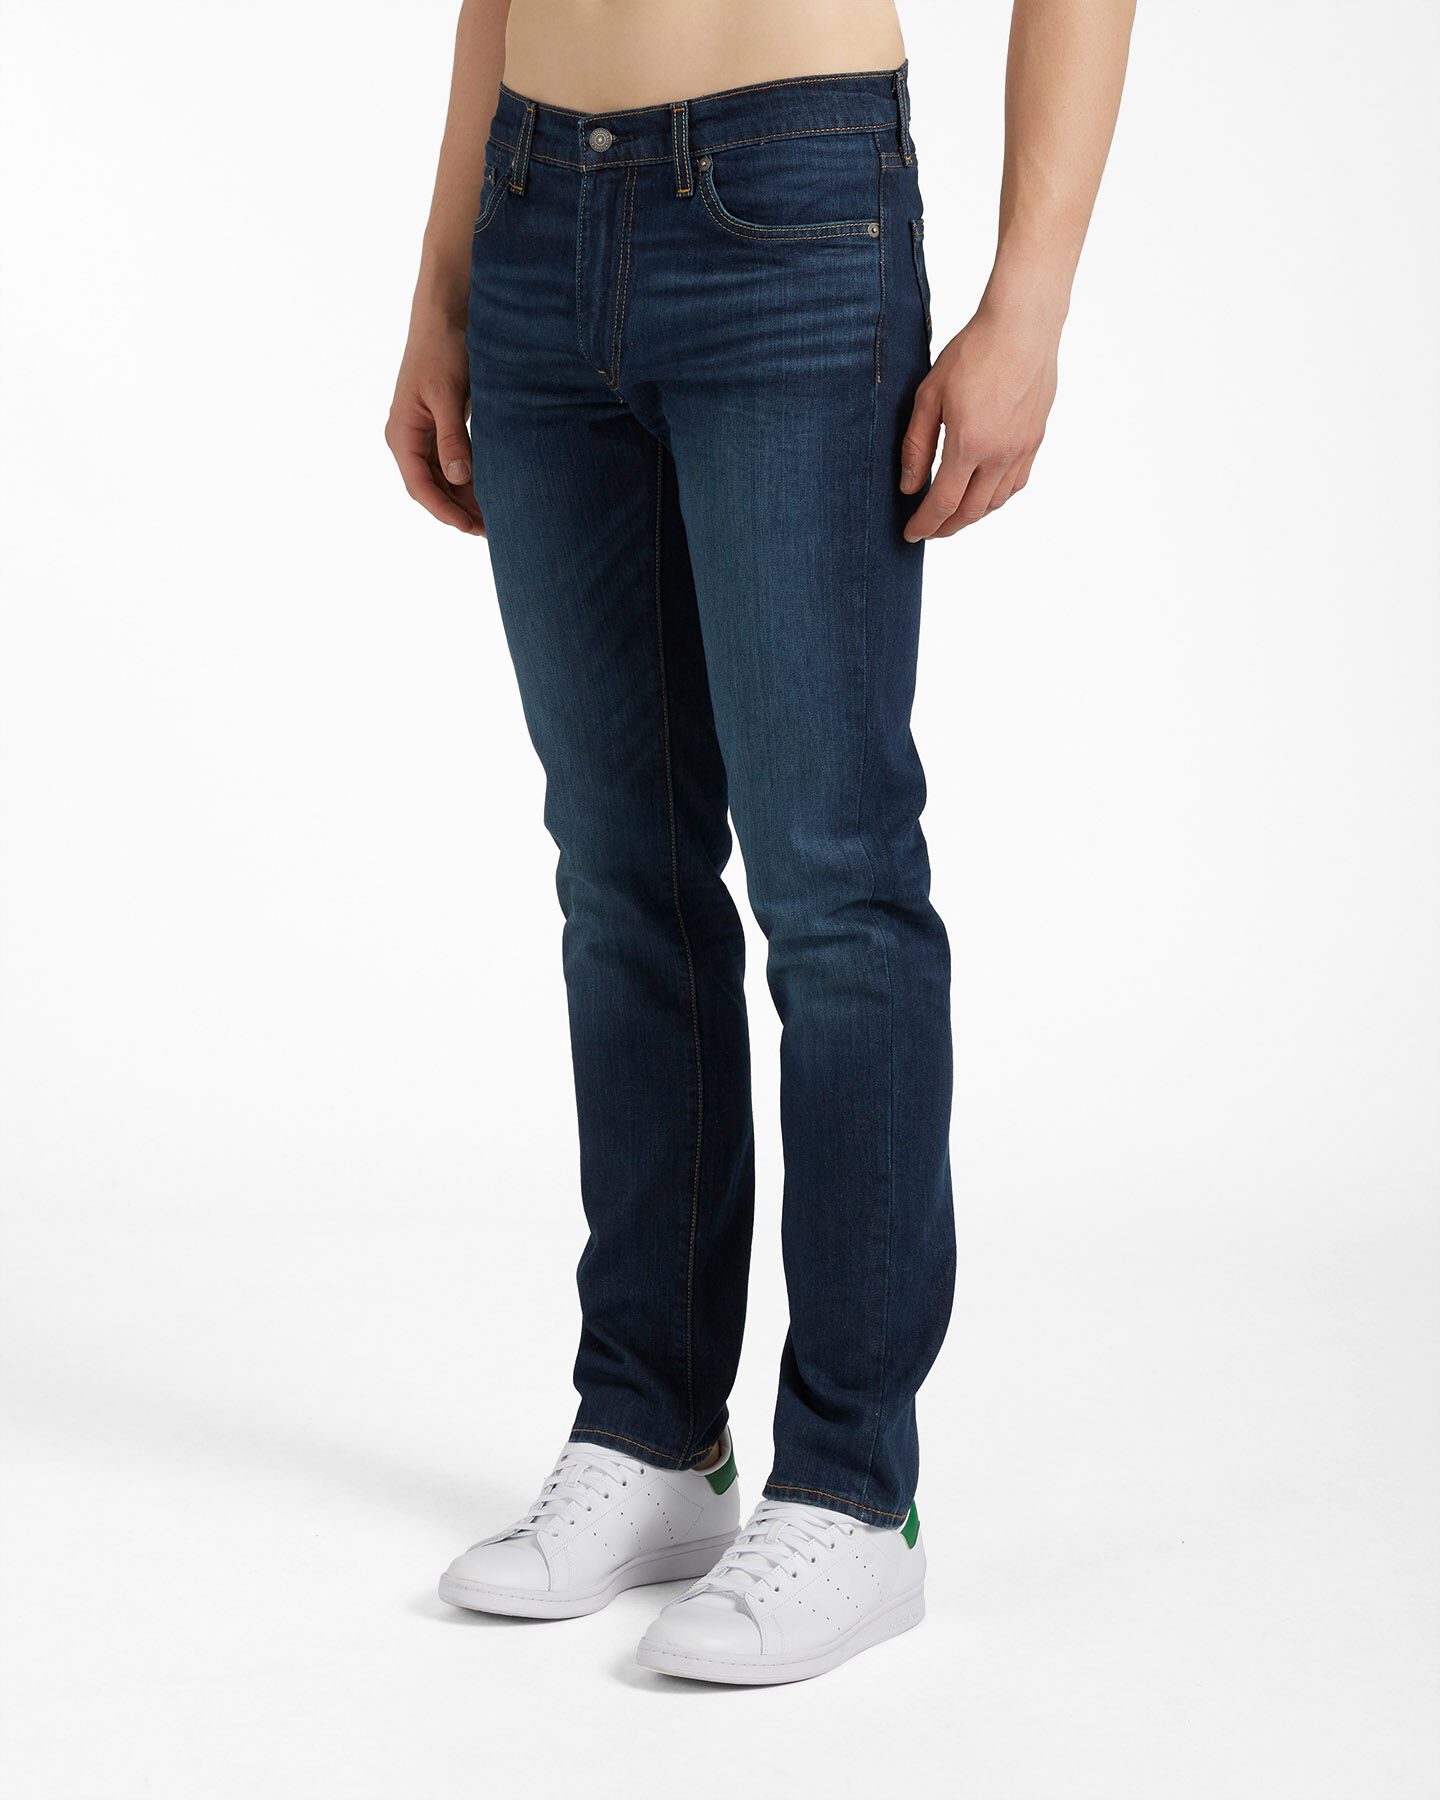  Jeans LEVI'S 511 SLIM FIT  M S4087712 scatto 2